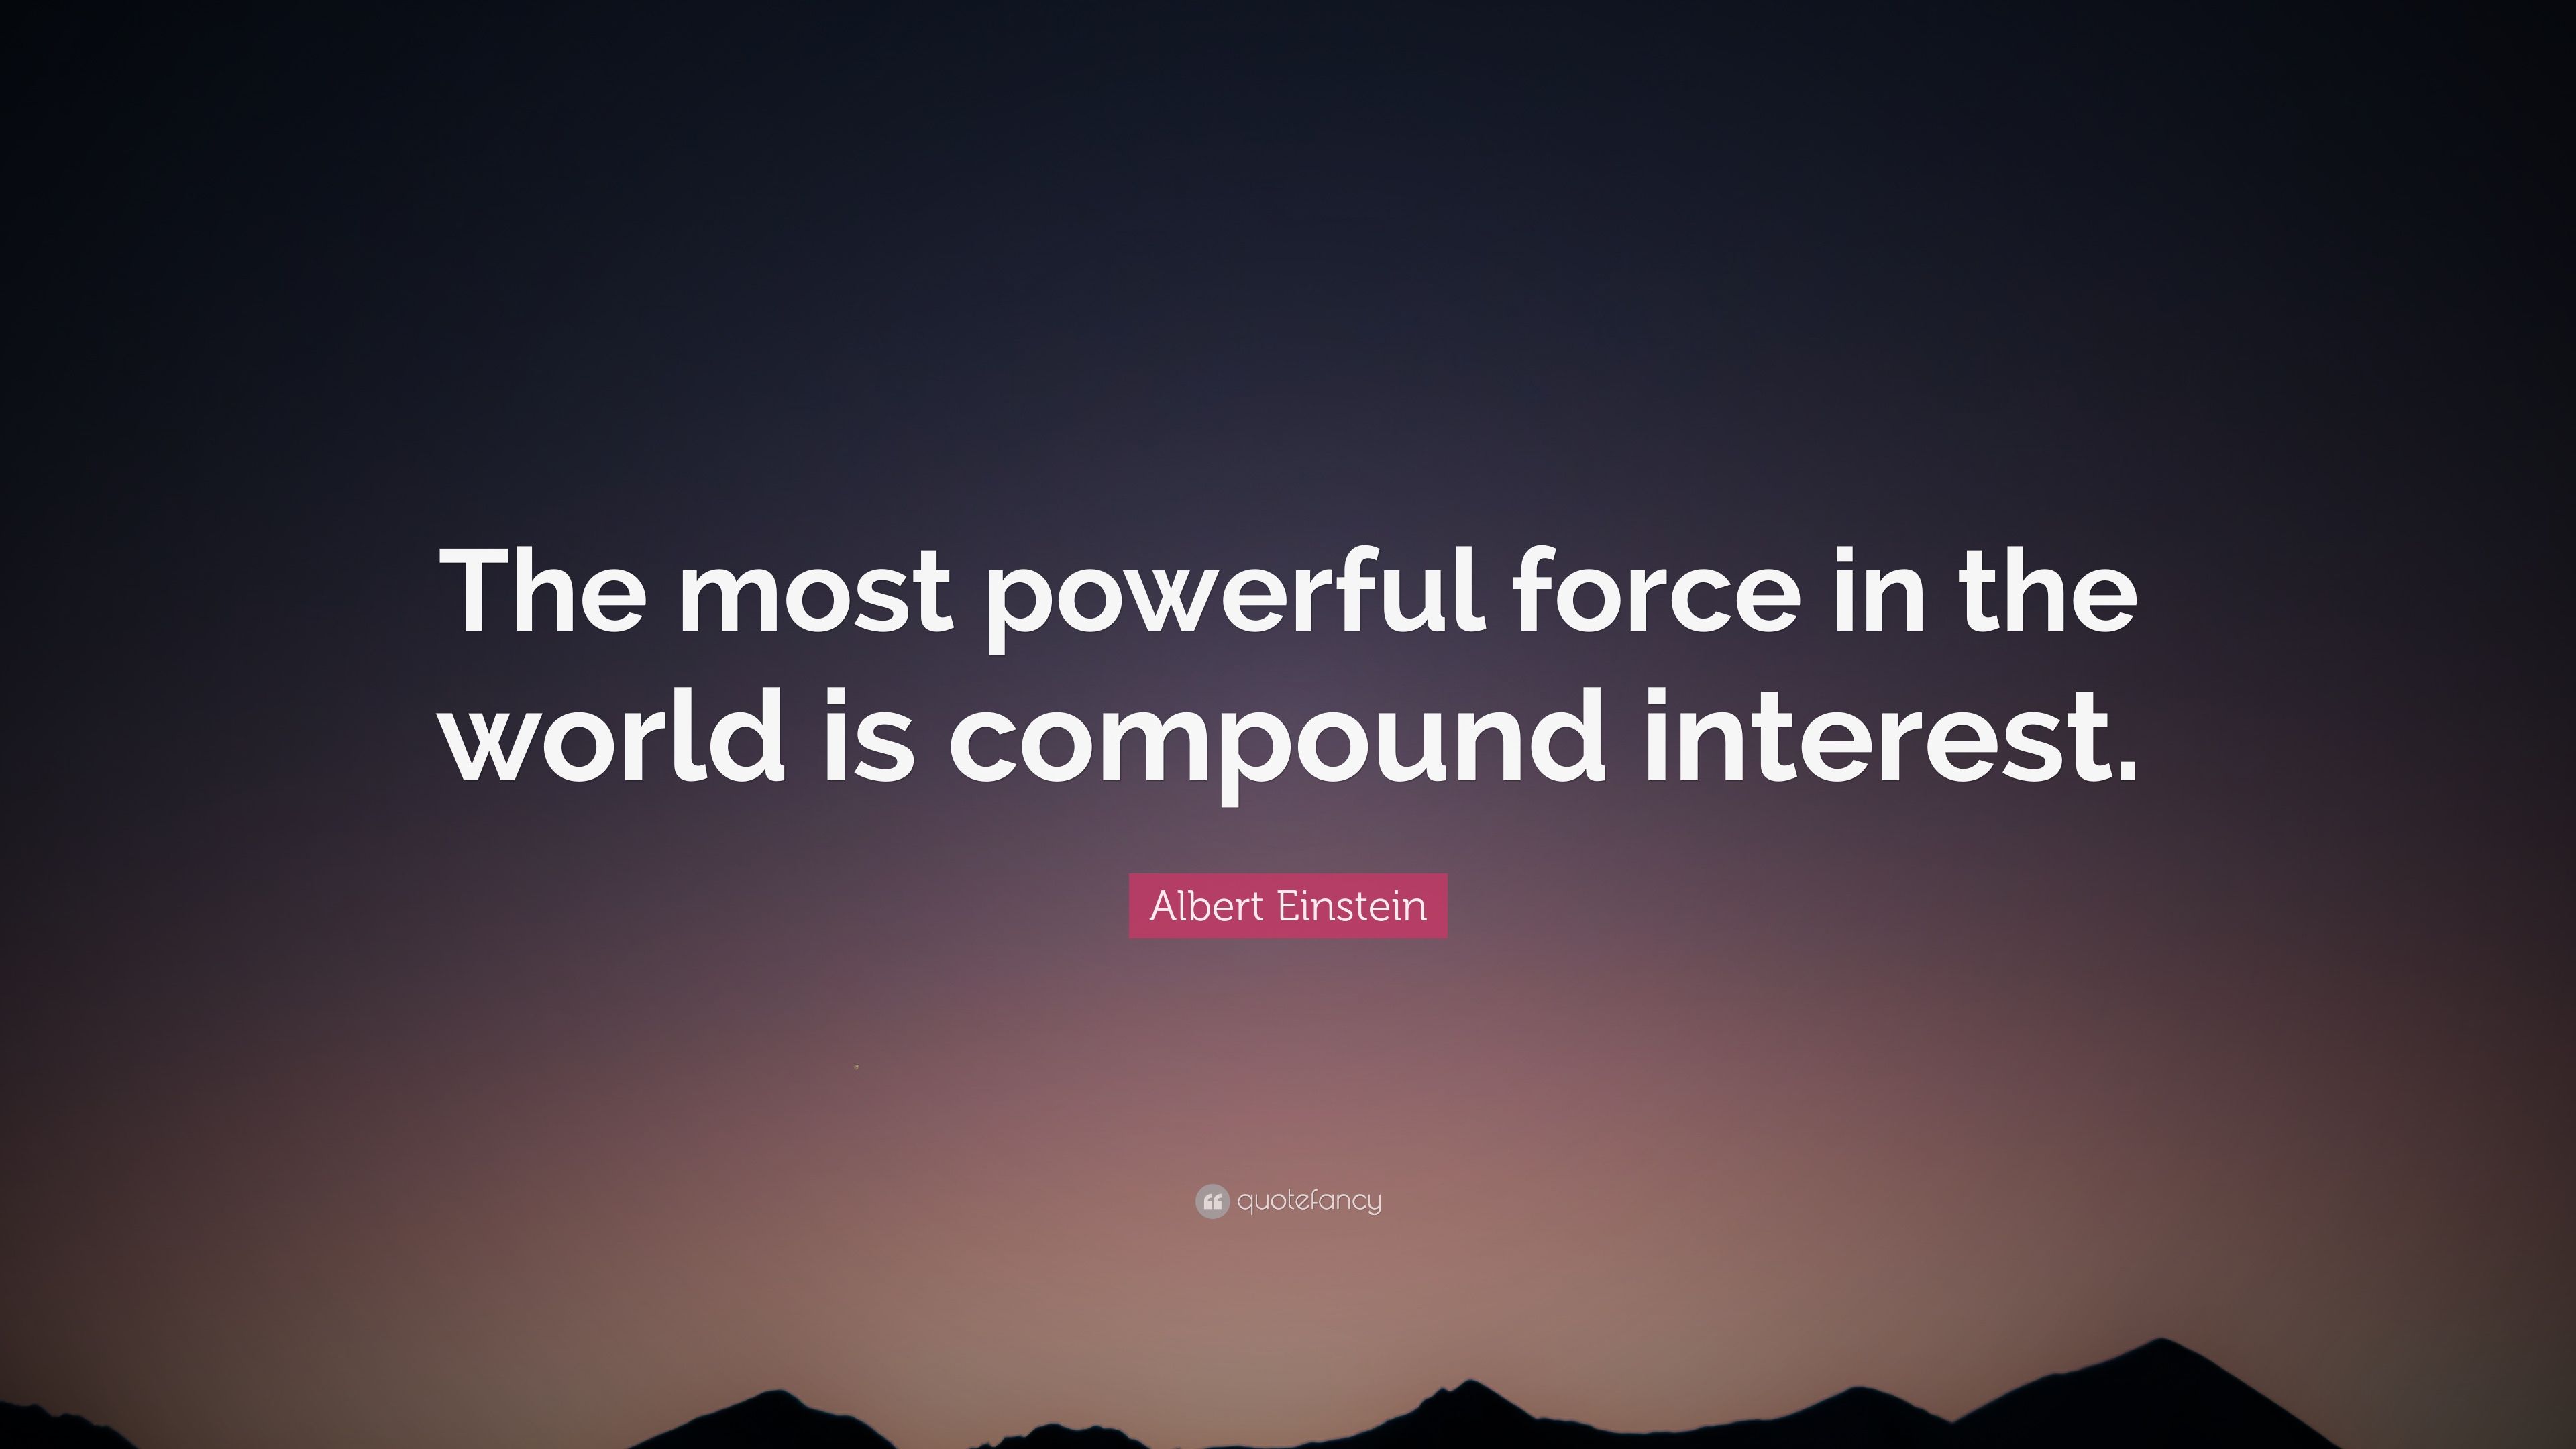 Albert Einstein Quote: “The most powerful force in the world is